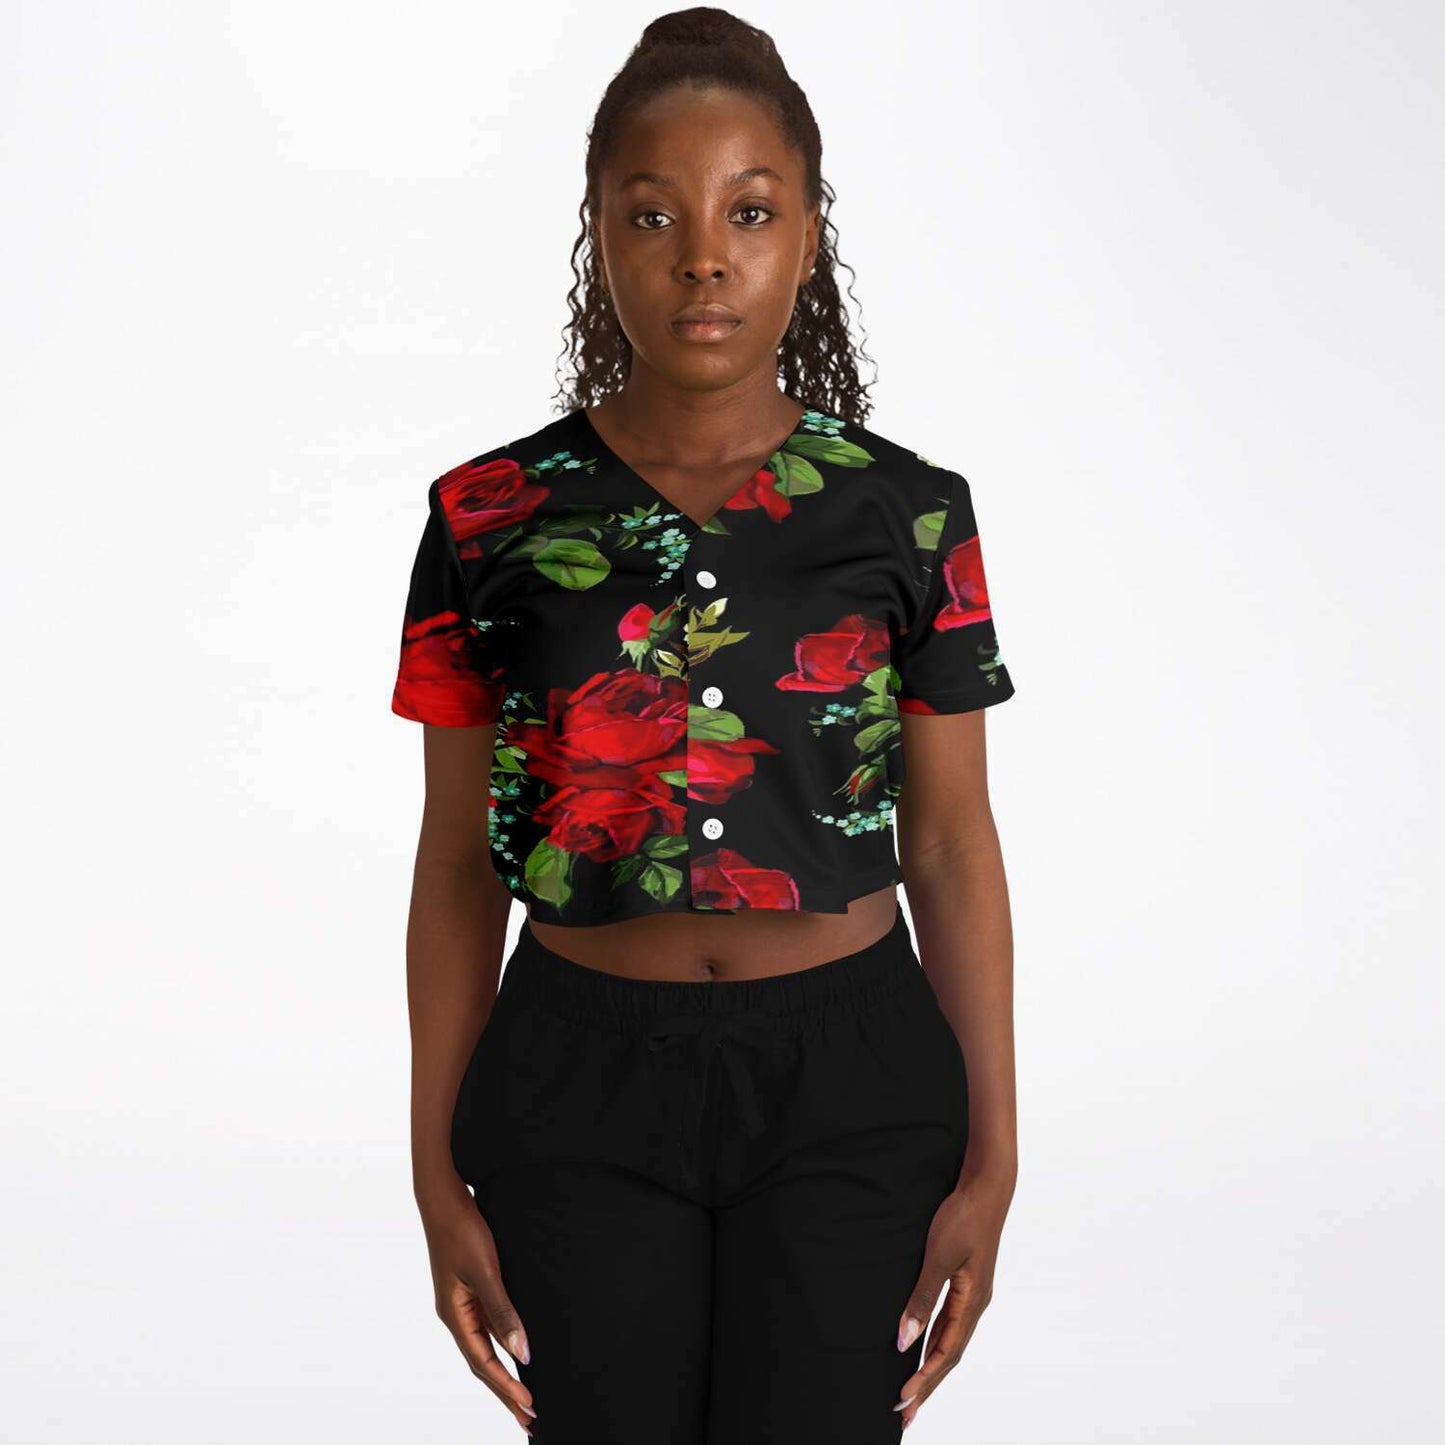 Wild Roses Cropped Jersey - Merchandize.ca